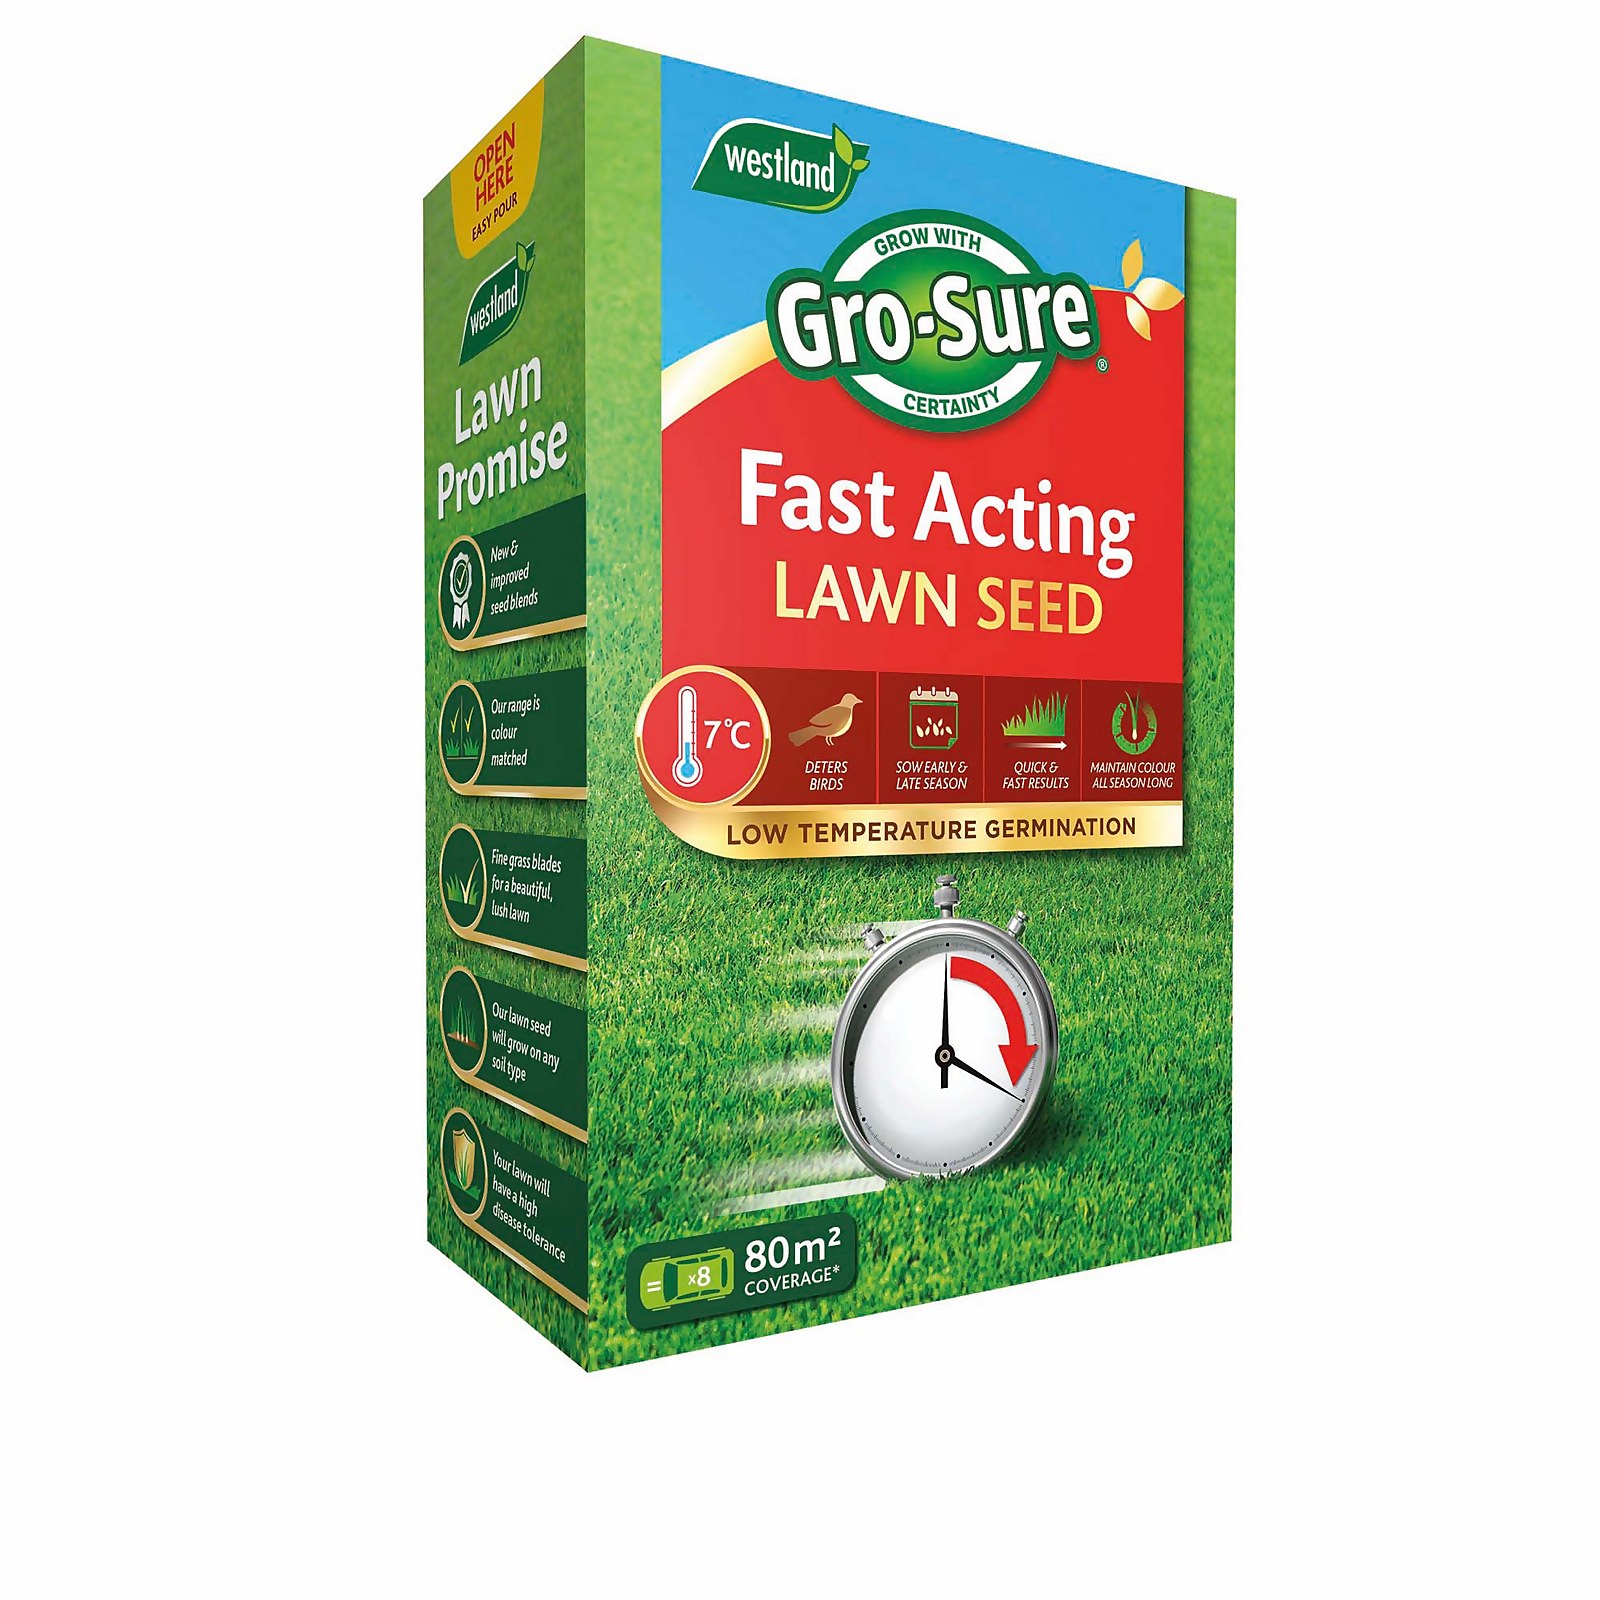 Photo of Gro-sure Fast Acting Lawn Seed - 80m²